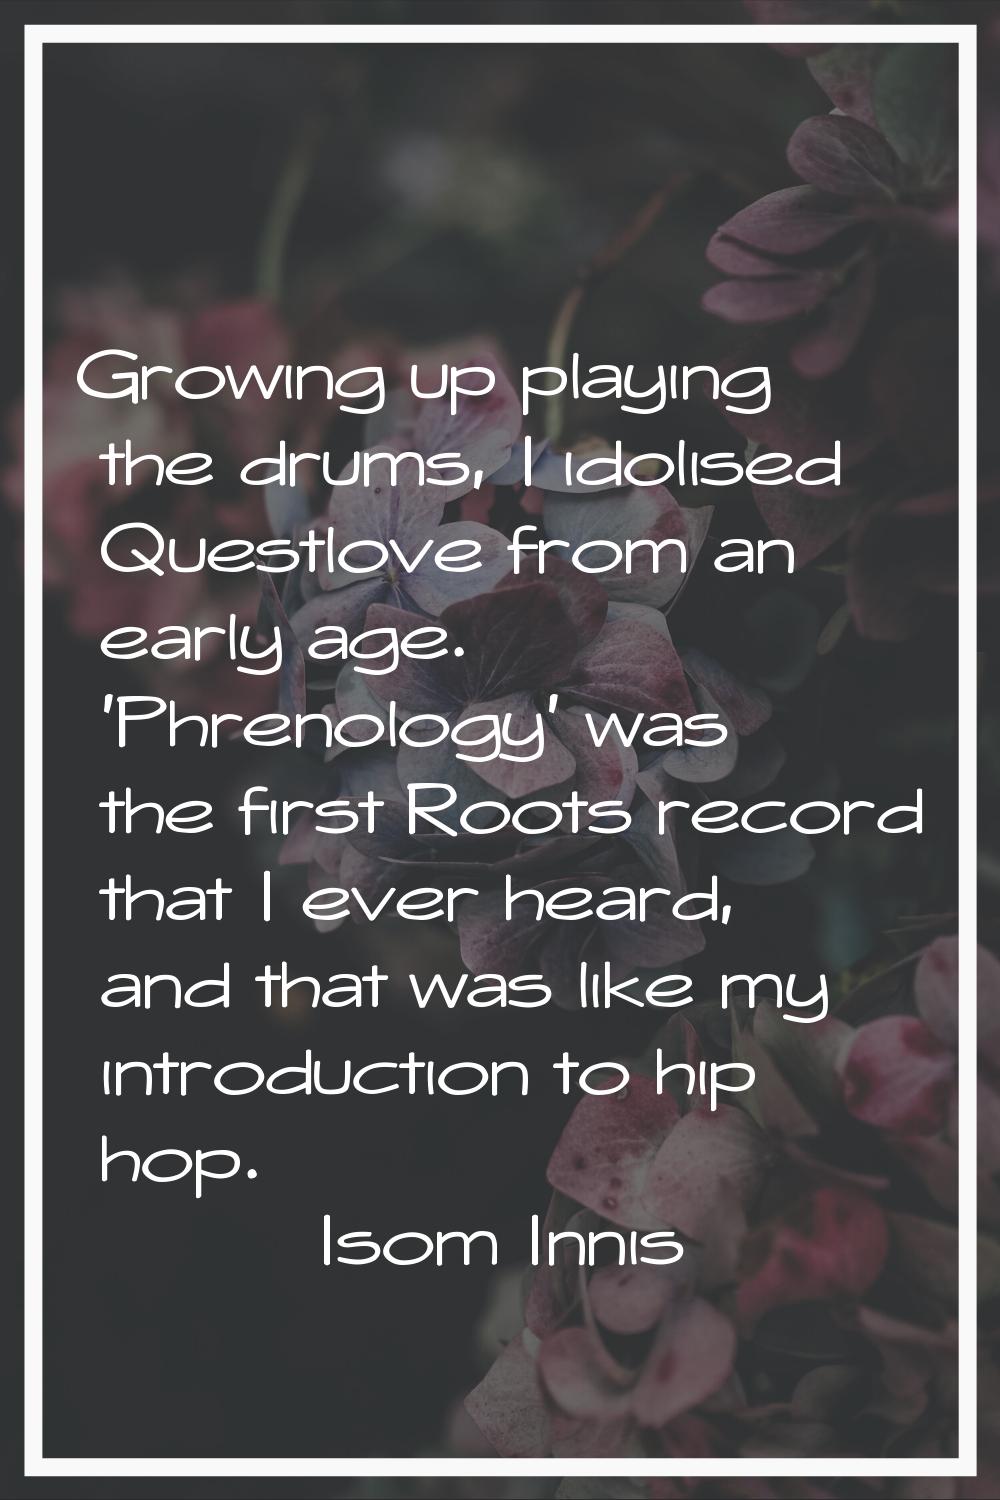 Growing up playing the drums, I idolised Questlove from an early age. 'Phrenology' was the first Ro